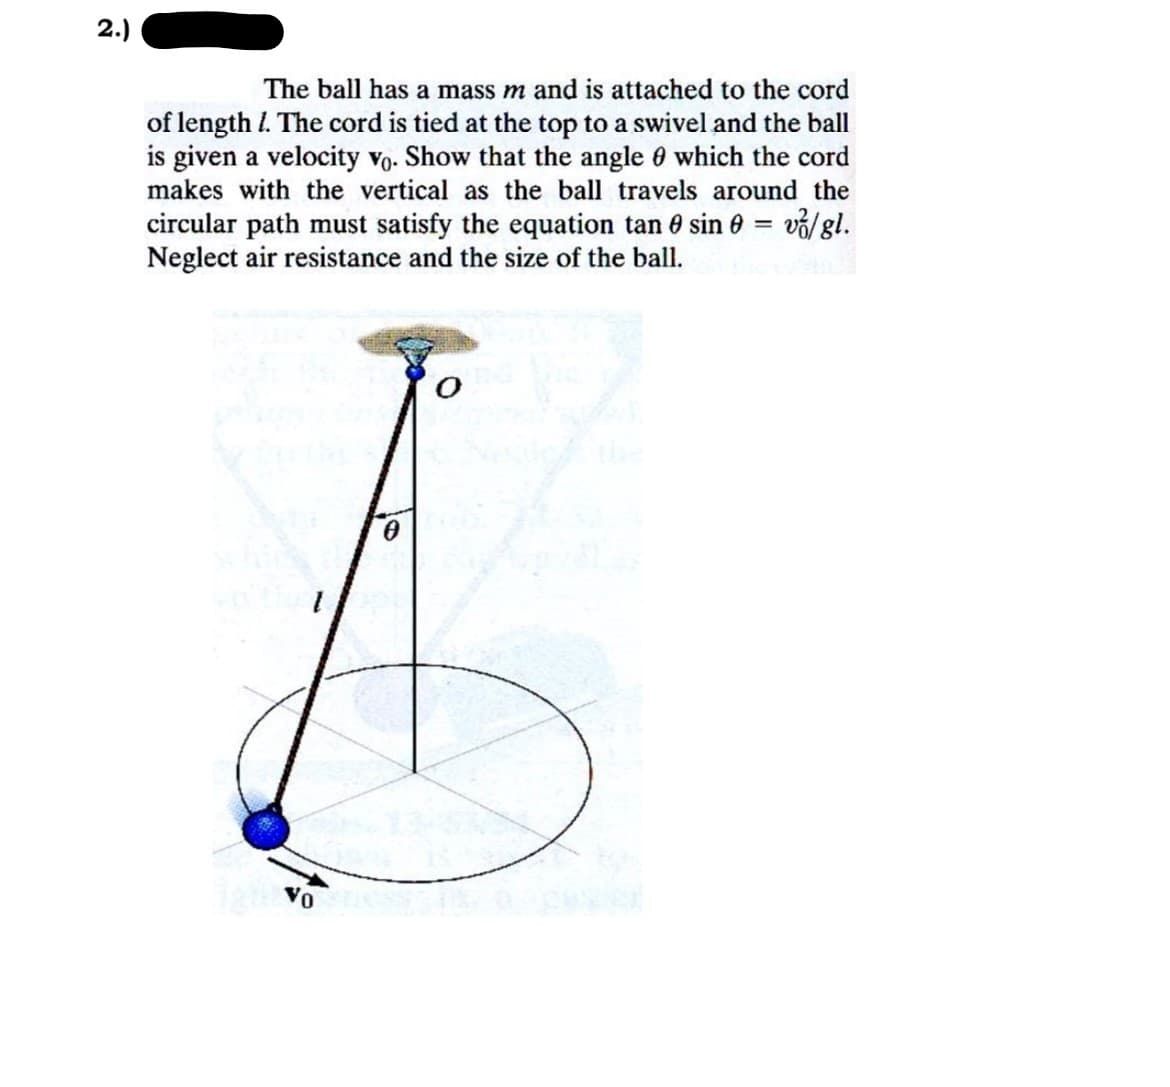 2.)
The ball has a mass m and is attached to the cord
of length 1. The cord is tied at the top to a swivel and the ball
is given a velocity vo. Show that the angle which the cord
makes with the vertical as the ball travels around the
circular path must satisfy the equation tan sin = v/ gl.
Neglect air resistance and the size of the ball.
ignovom
0